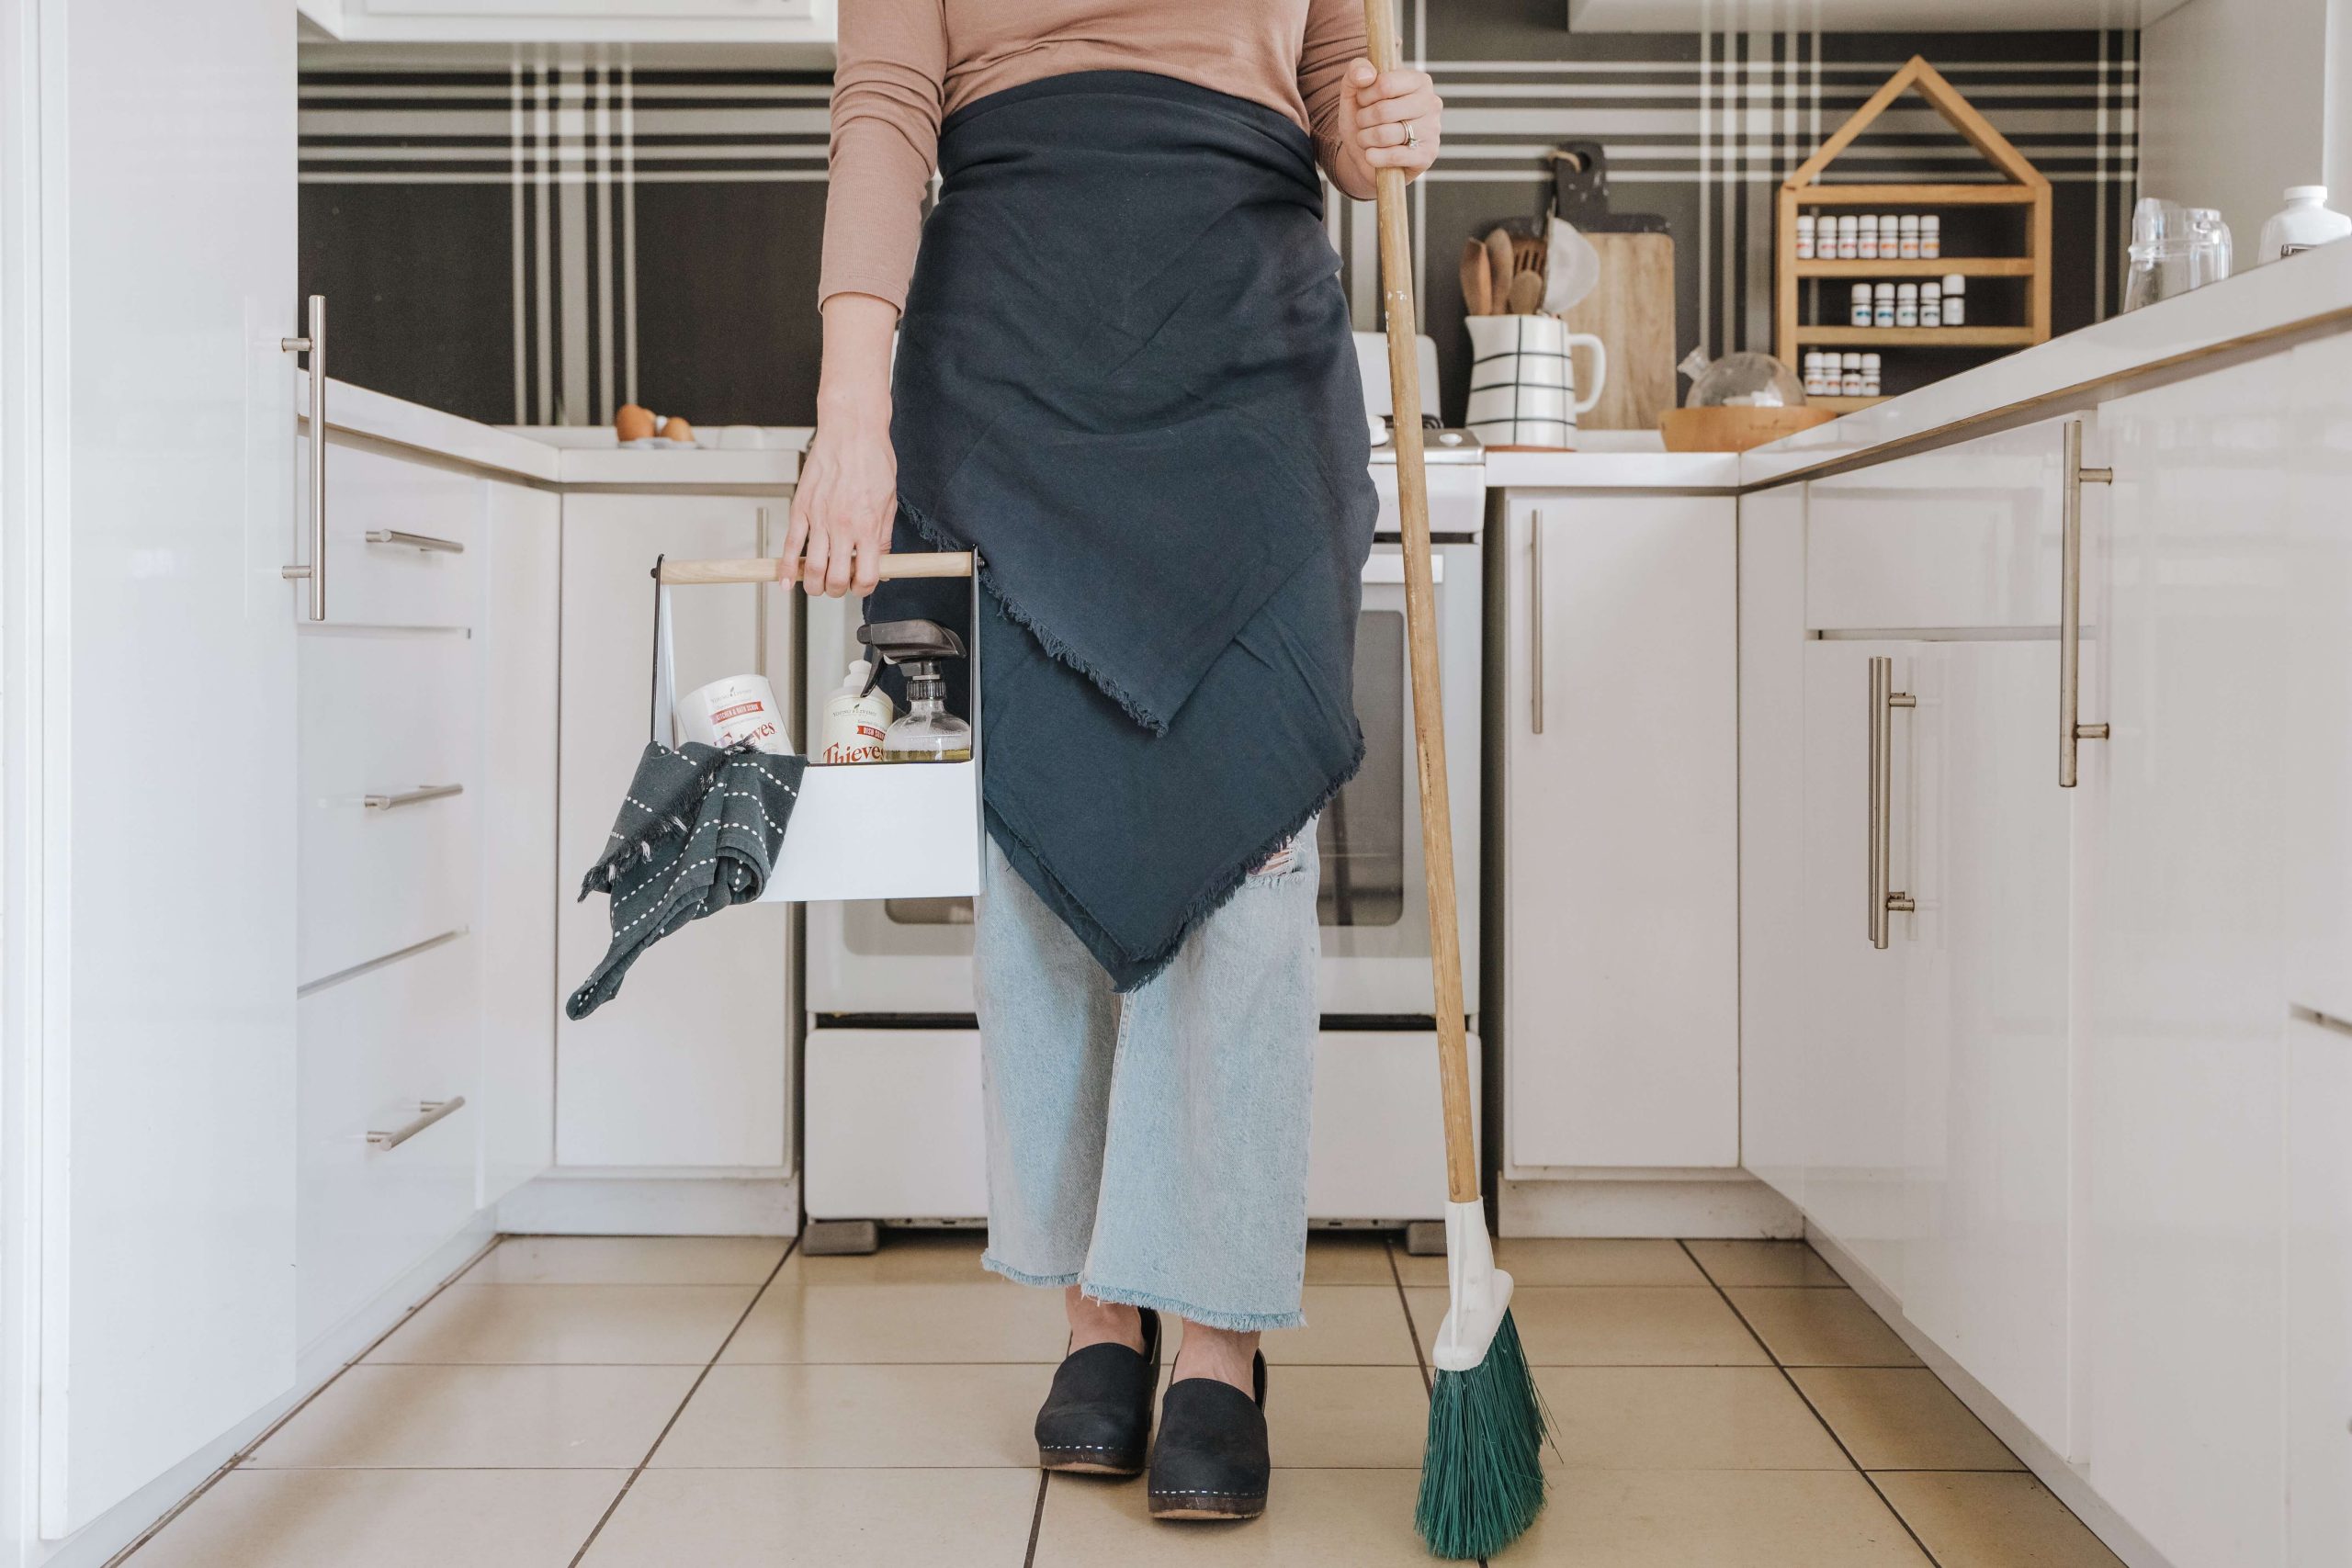 spring cleaning - woman in kitchen